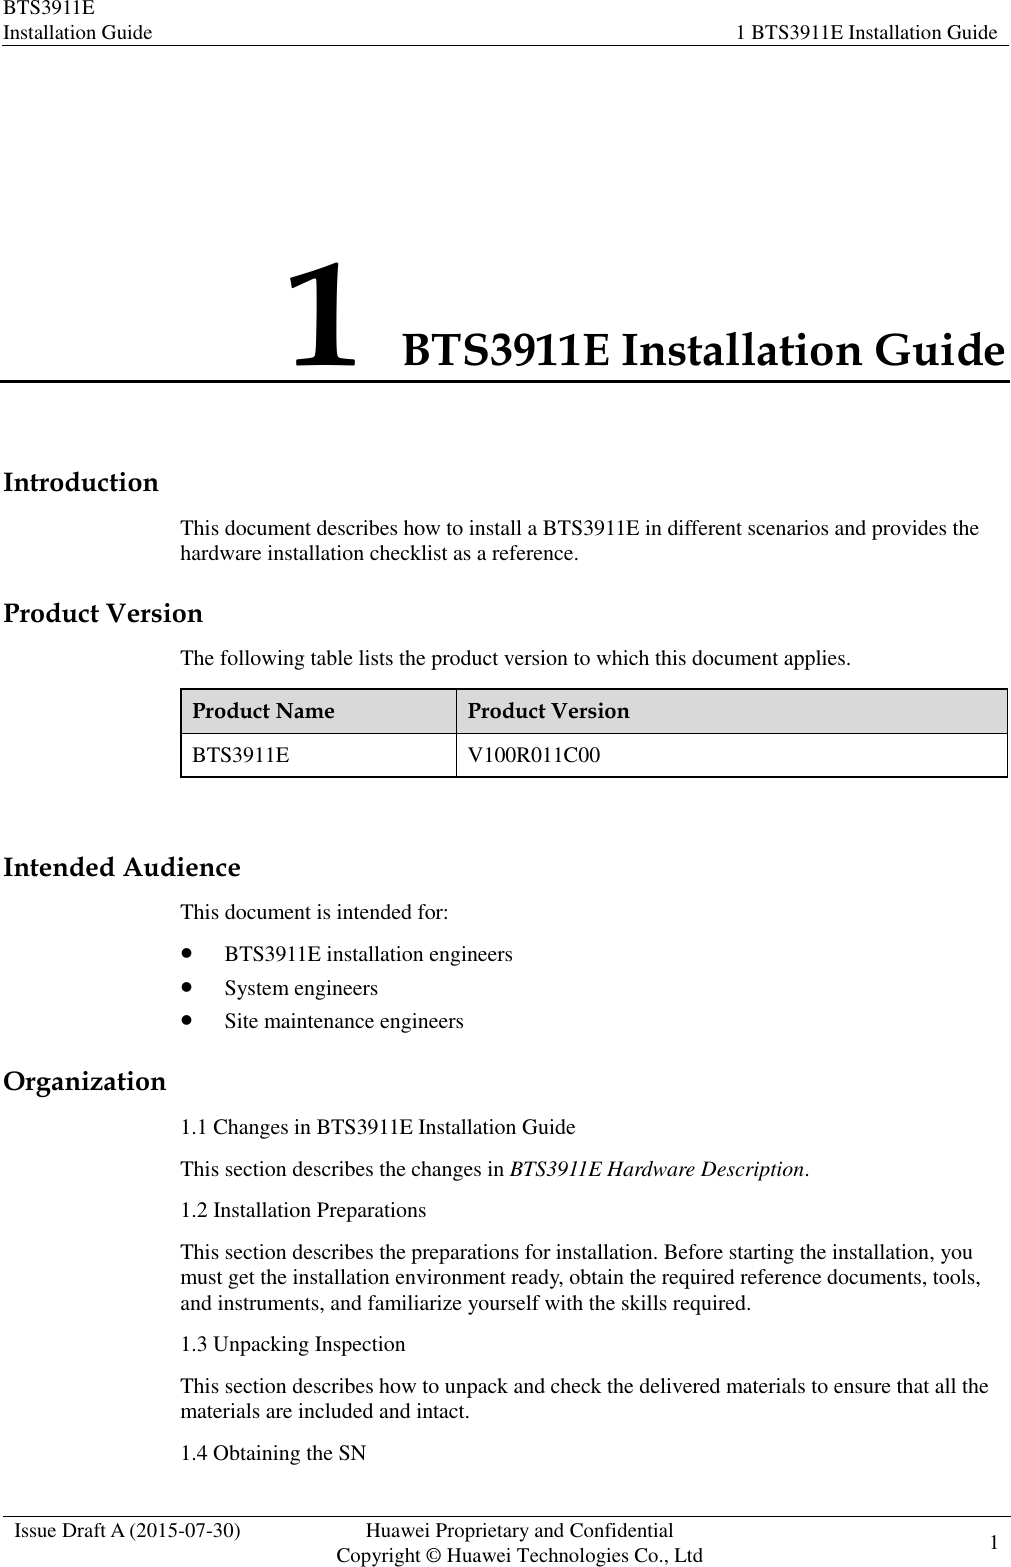 BTS3911E Installation Guide 1 BTS3911E Installation Guide  Issue Draft A (2015-07-30) Huawei Proprietary and Confidential           Copyright © Huawei Technologies Co., Ltd 1    1 BTS3911E Installation Guide Introduction This document describes how to install a BTS3911E in different scenarios and provides the hardware installation checklist as a reference. Product Version The following table lists the product version to which this document applies. Product Name Product Version BTS3911E V100R011C00  Intended Audience This document is intended for:  BTS3911E installation engineers  System engineers  Site maintenance engineers Organization 1.1 Changes in BTS3911E Installation Guide This section describes the changes in BTS3911E Hardware Description. 1.2 Installation Preparations This section describes the preparations for installation. Before starting the installation, you must get the installation environment ready, obtain the required reference documents, tools, and instruments, and familiarize yourself with the skills required. 1.3 Unpacking Inspection This section describes how to unpack and check the delivered materials to ensure that all the materials are included and intact. 1.4 Obtaining the SN 